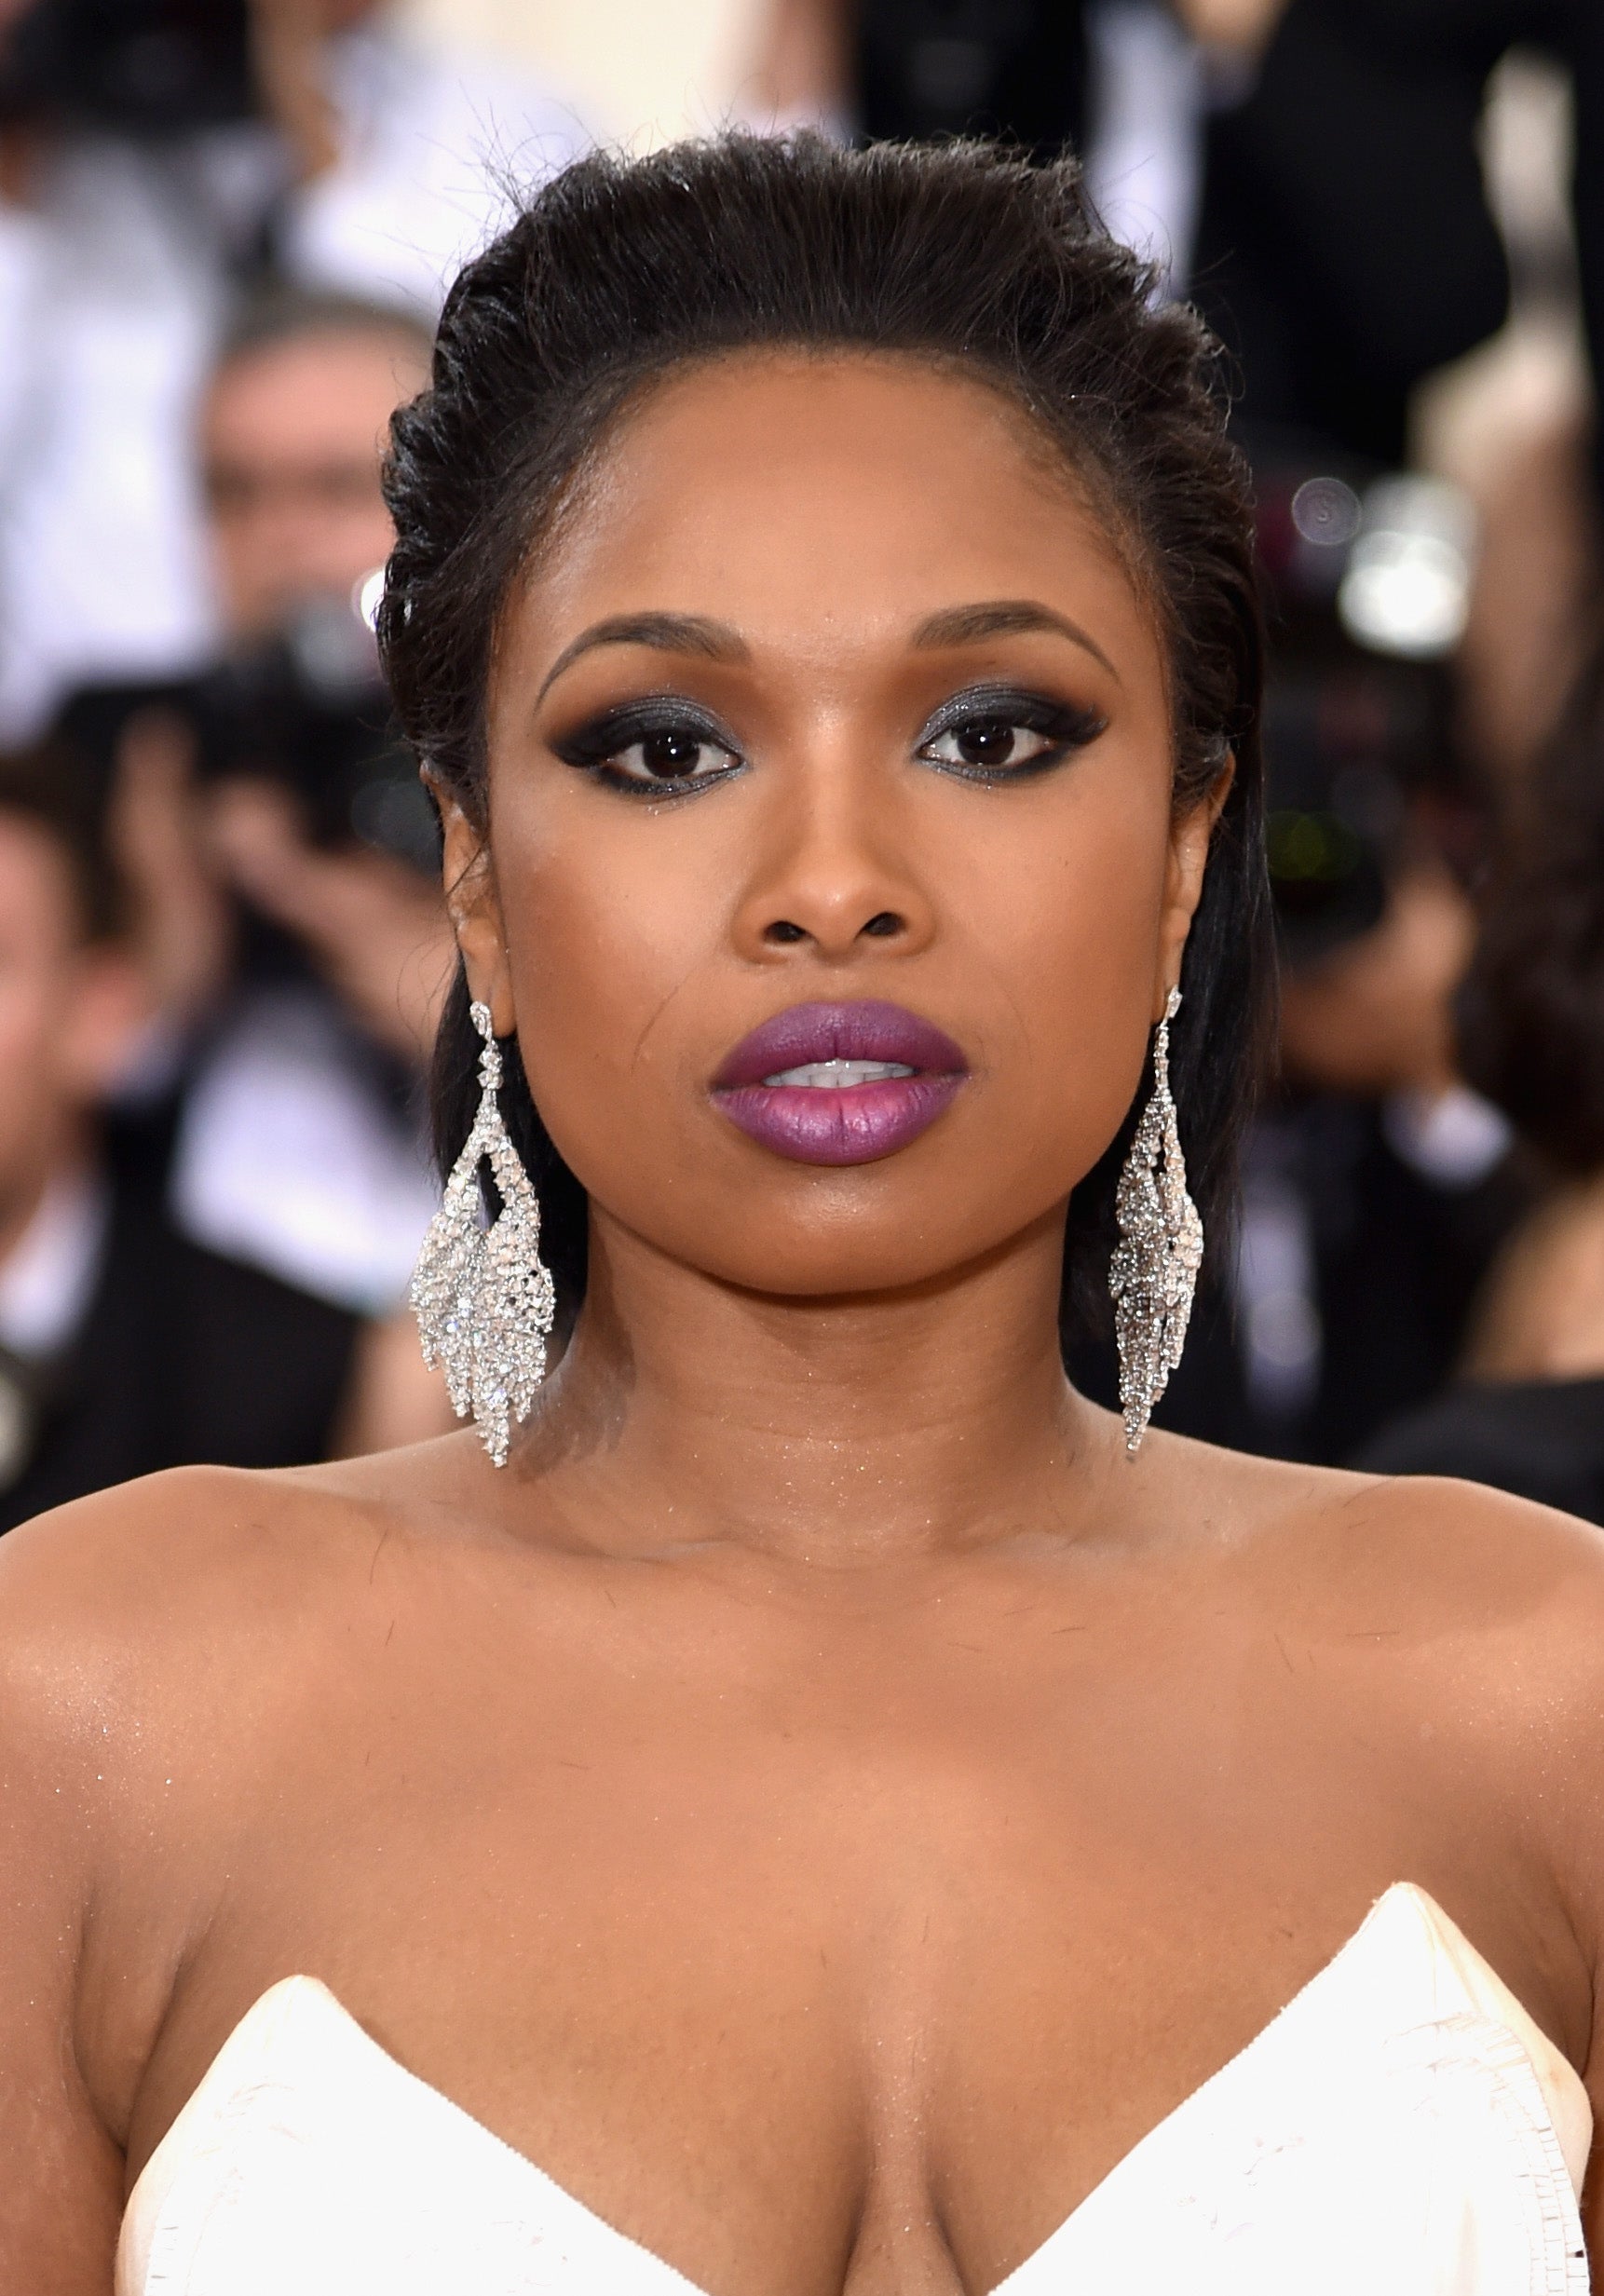 Jennifer Hudson Checks Fan Who Made Ignorant Comment About Her Weight Loss
